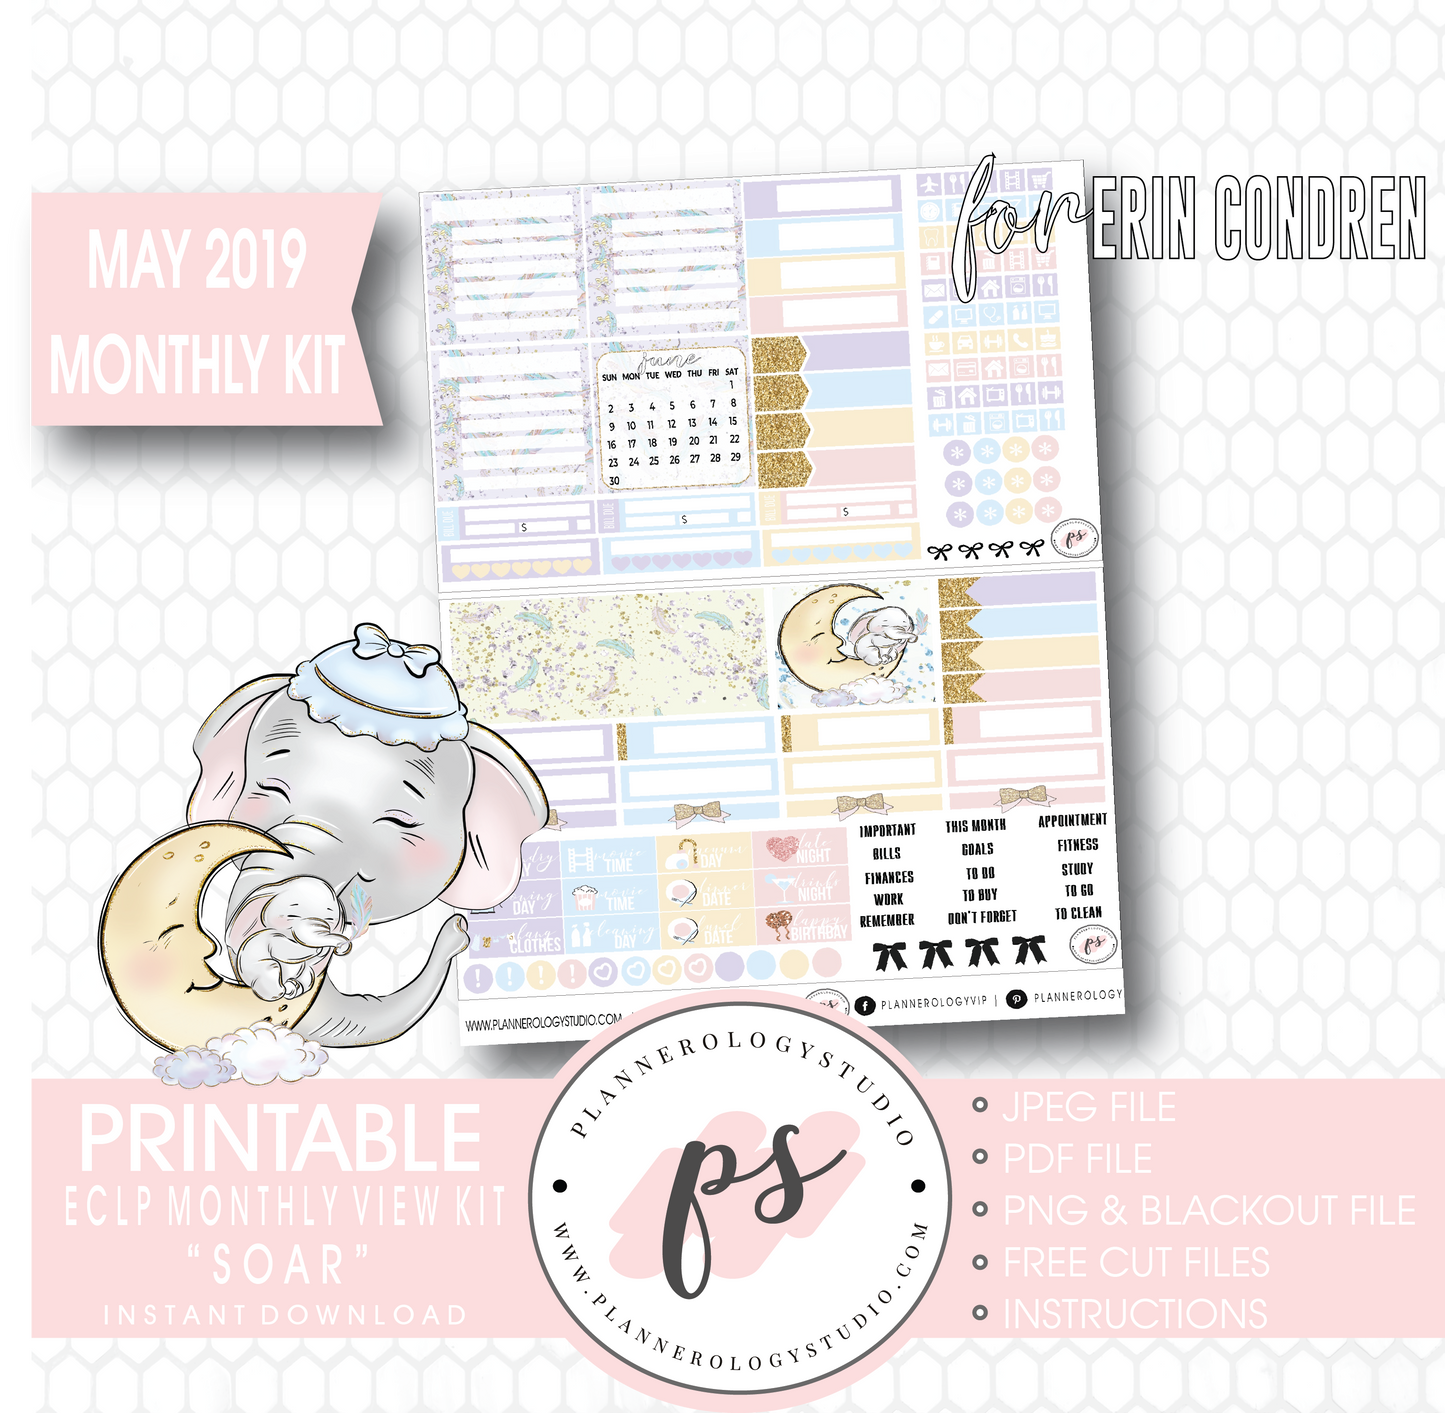 Soar (Dumbo Inspired) May 2019 Monthly View Kit Digital Printable Planner Stickers (for use with Erin Condren) - Plannerologystudio